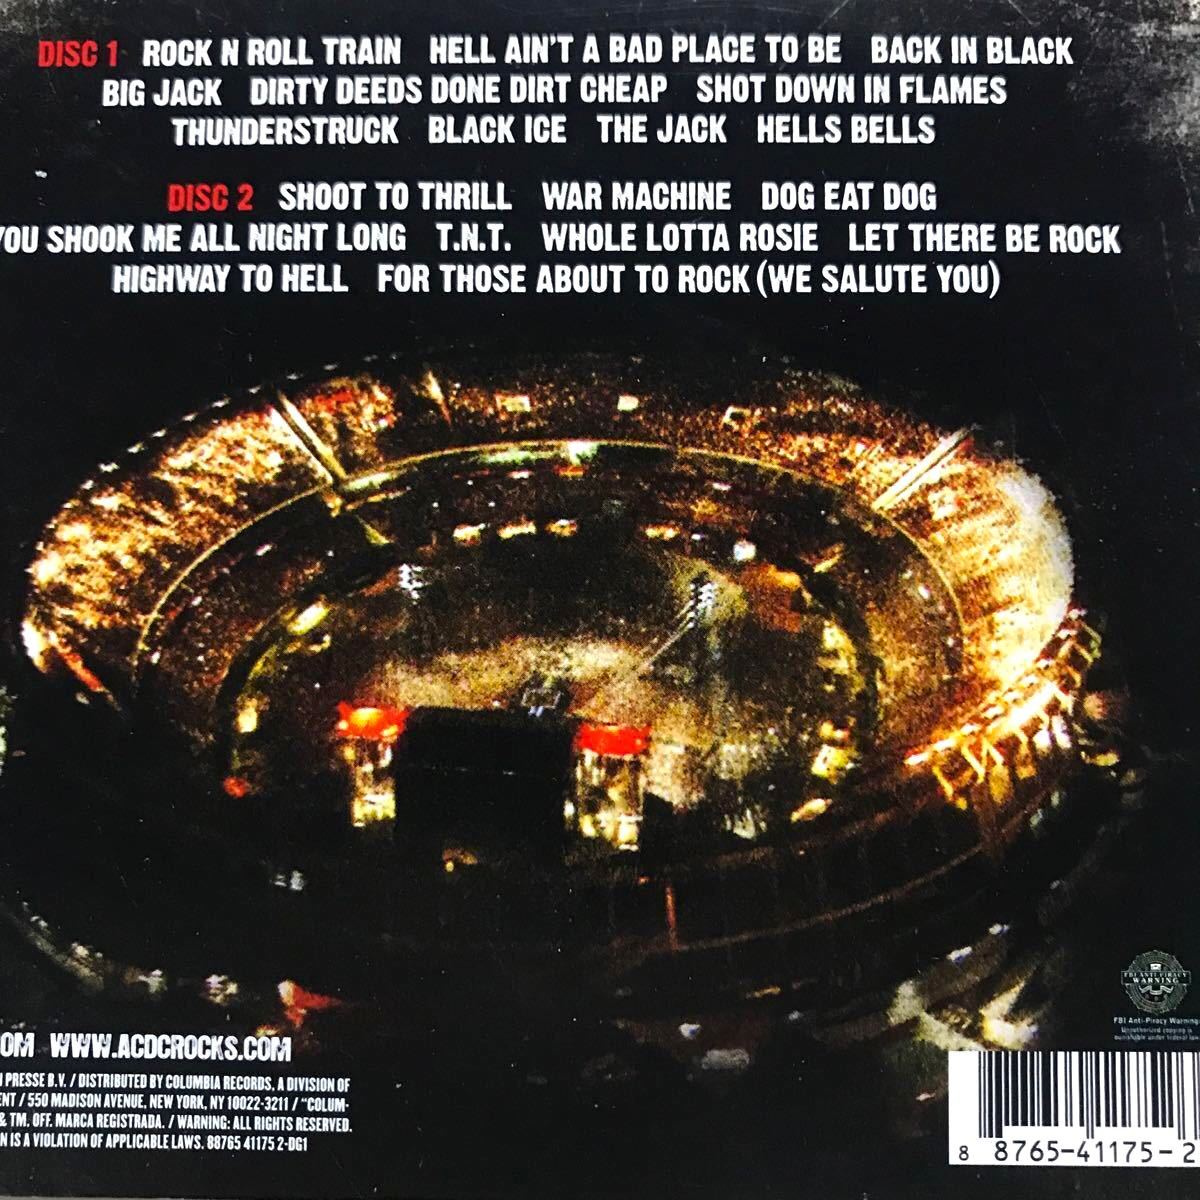 ◆◇ AC/DC ◇◆ Live at River Plate/ライブ･アット･リバープレート◇(2CD･輸入盤) 送料無料！